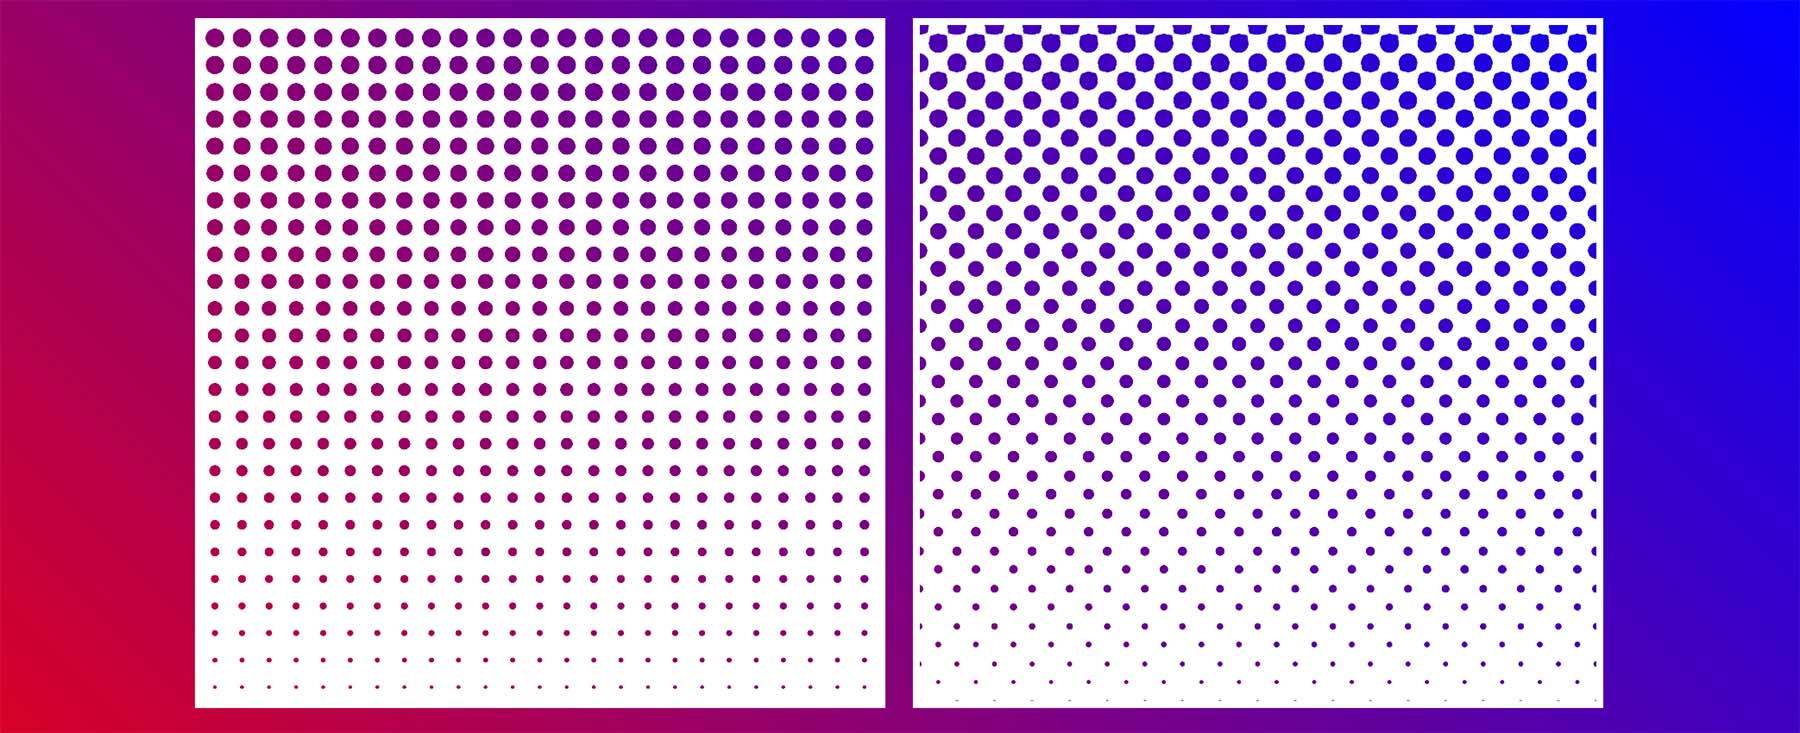 The two halftone patterns as gradient dots on a white background.